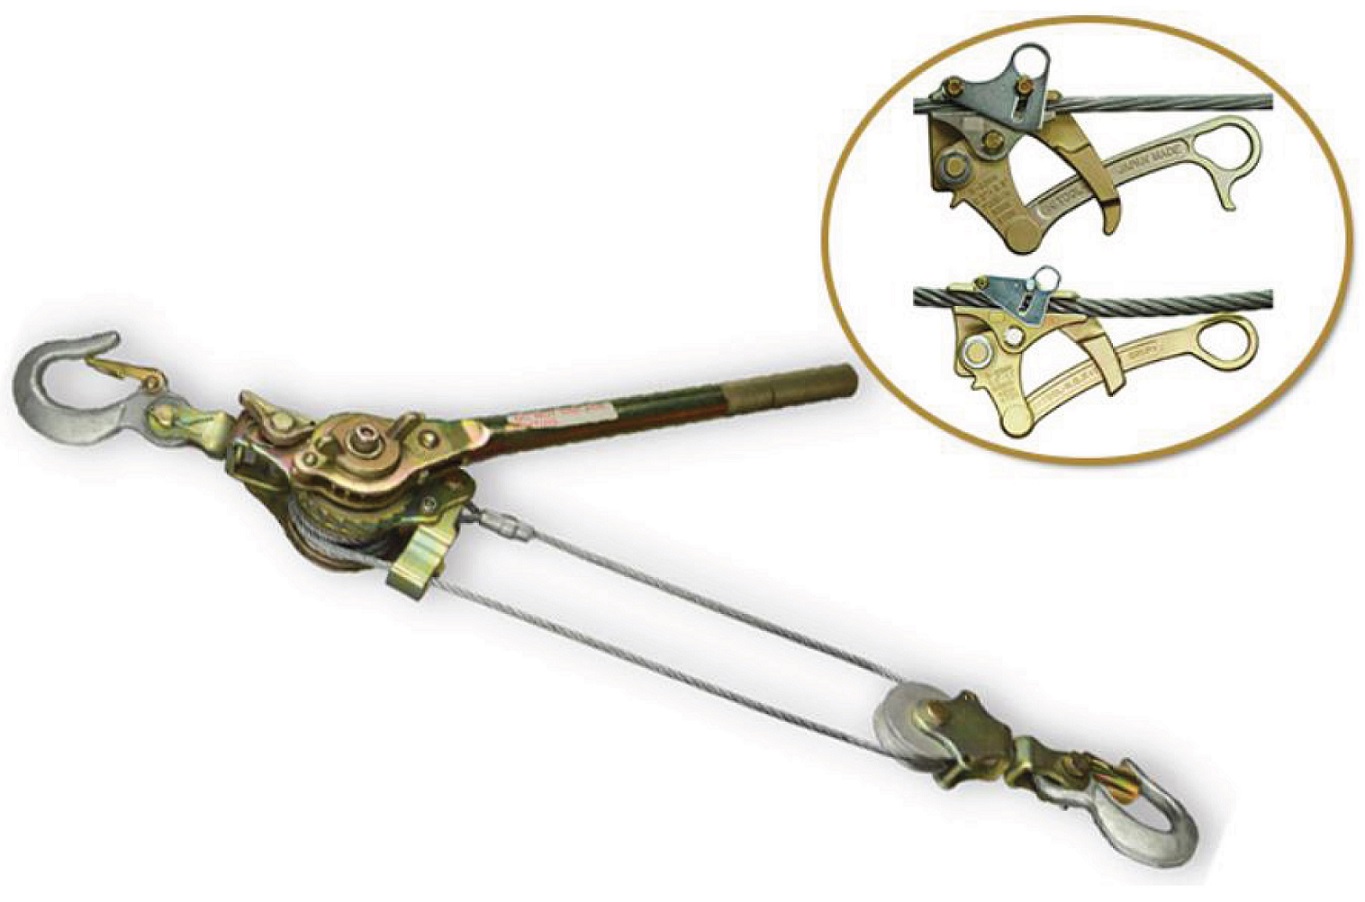 Technical details of Portable Hand Operated Ratchet Cable Puller